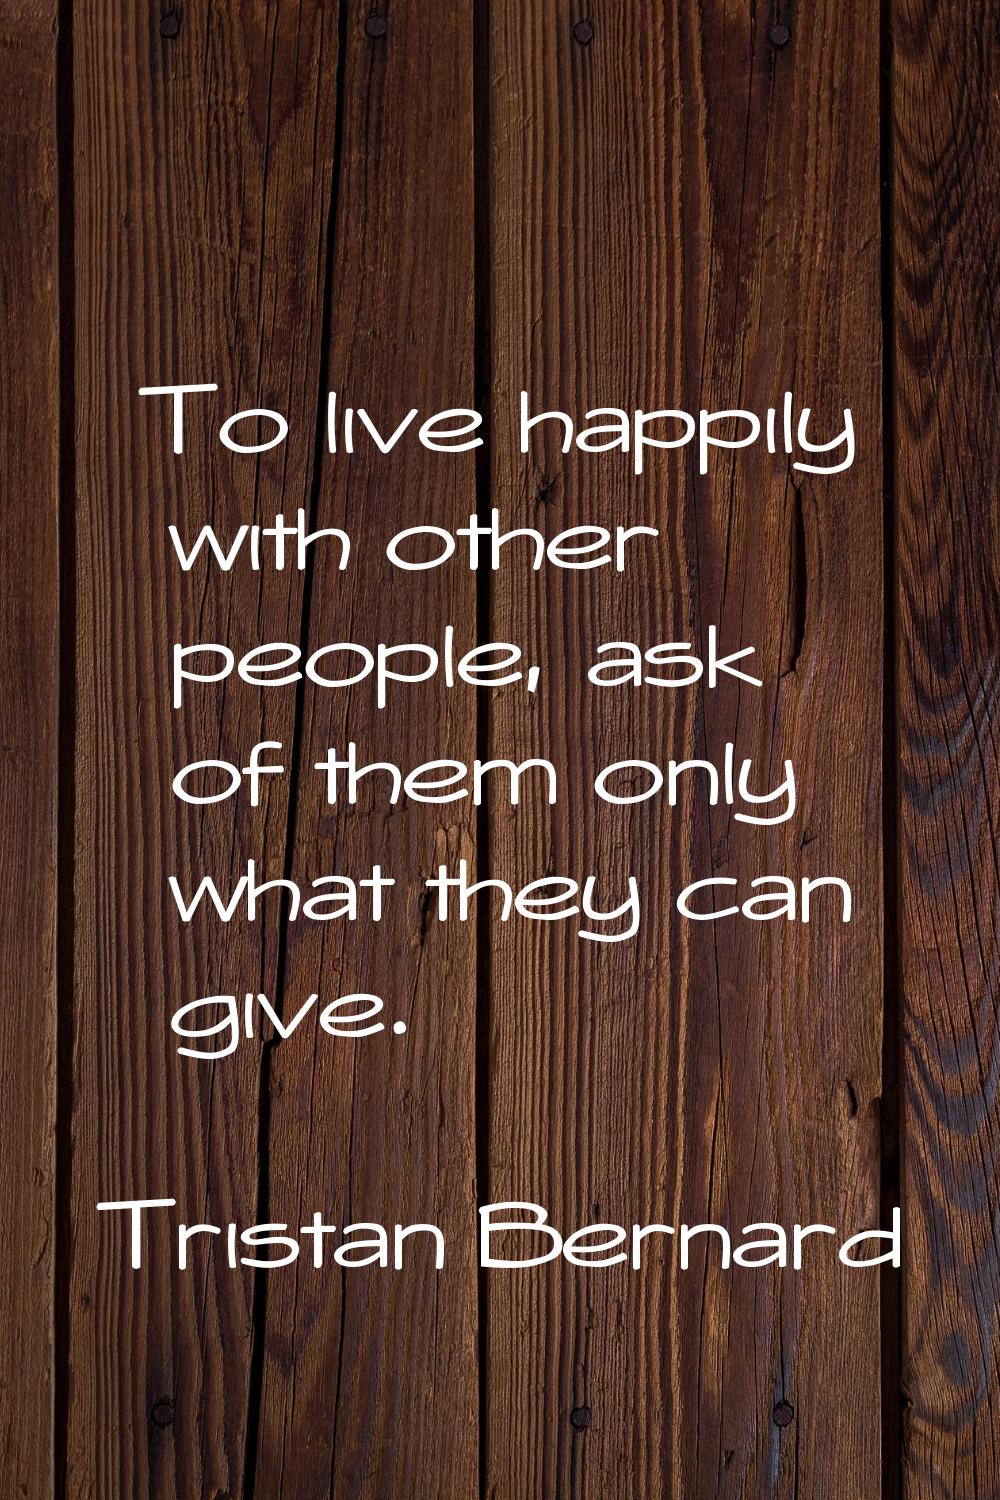 To live happily with other people, ask of them only what they can give.